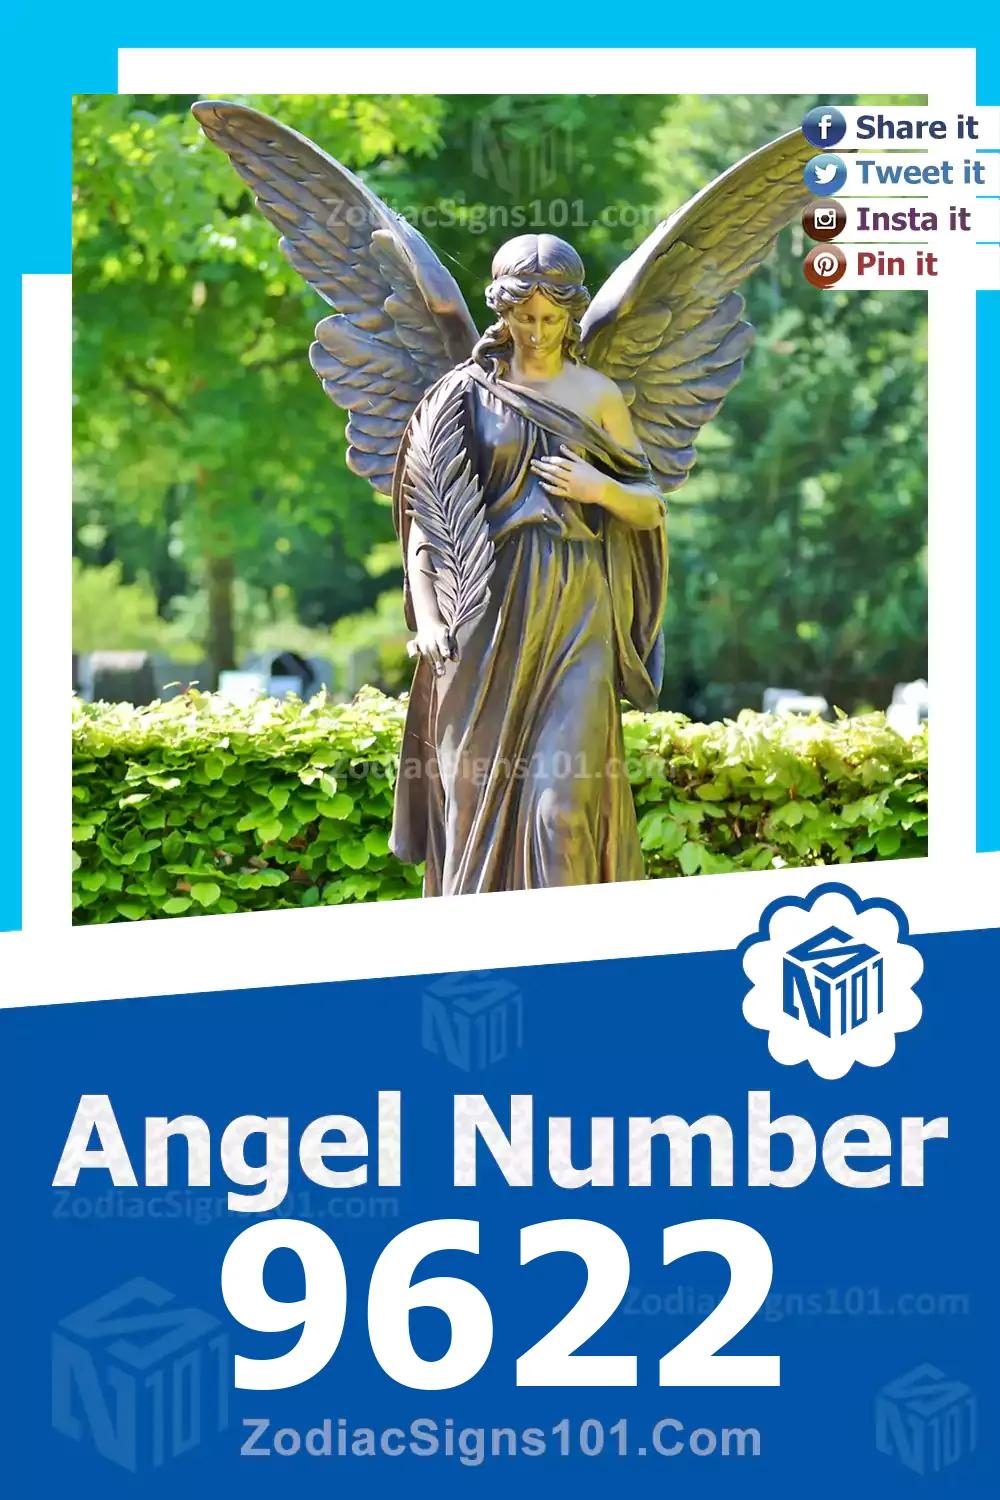 9622 Angel Number Meaning